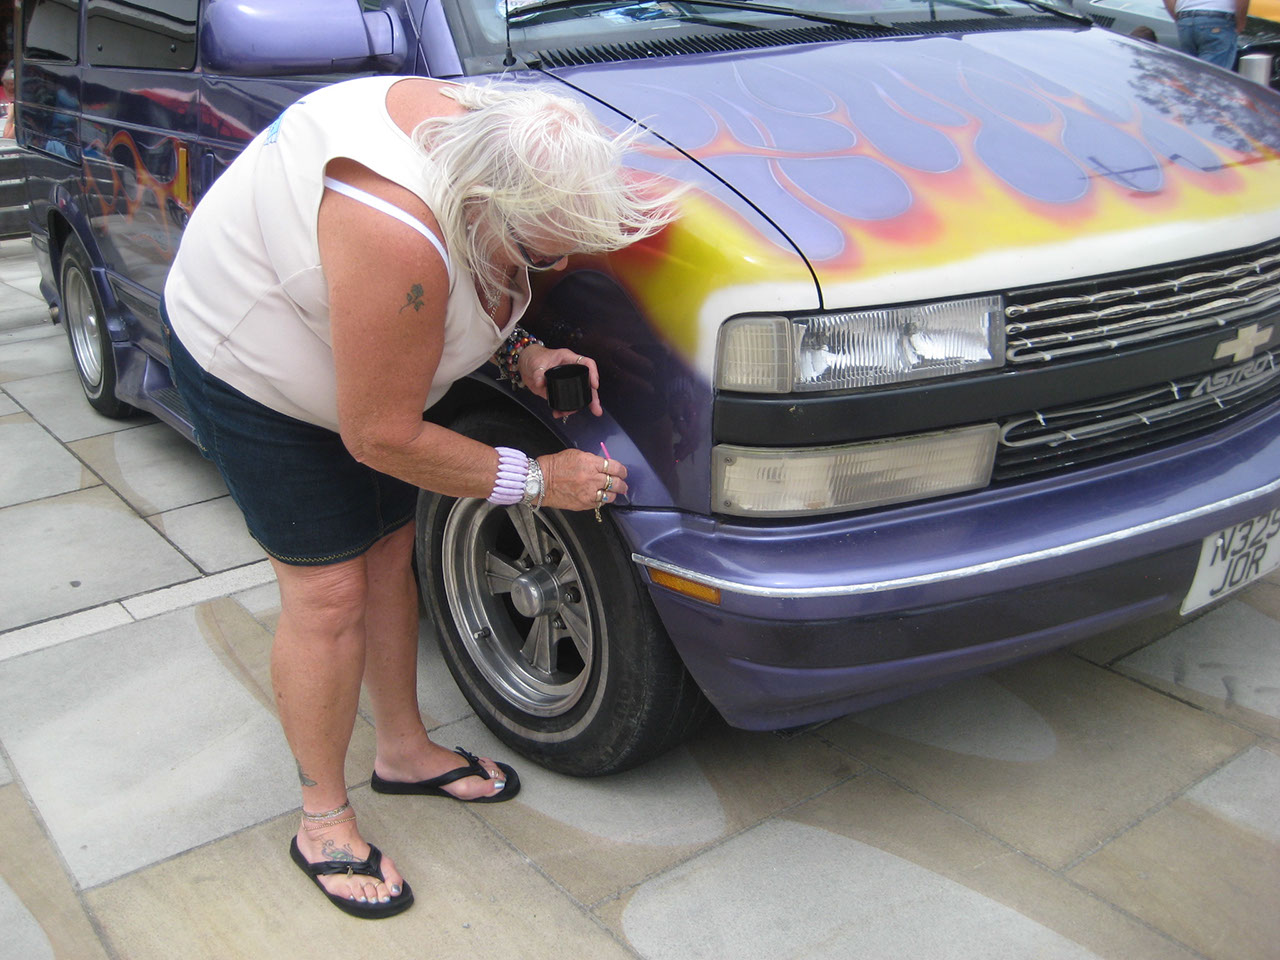 Jennie touching up the paint on Tims van.